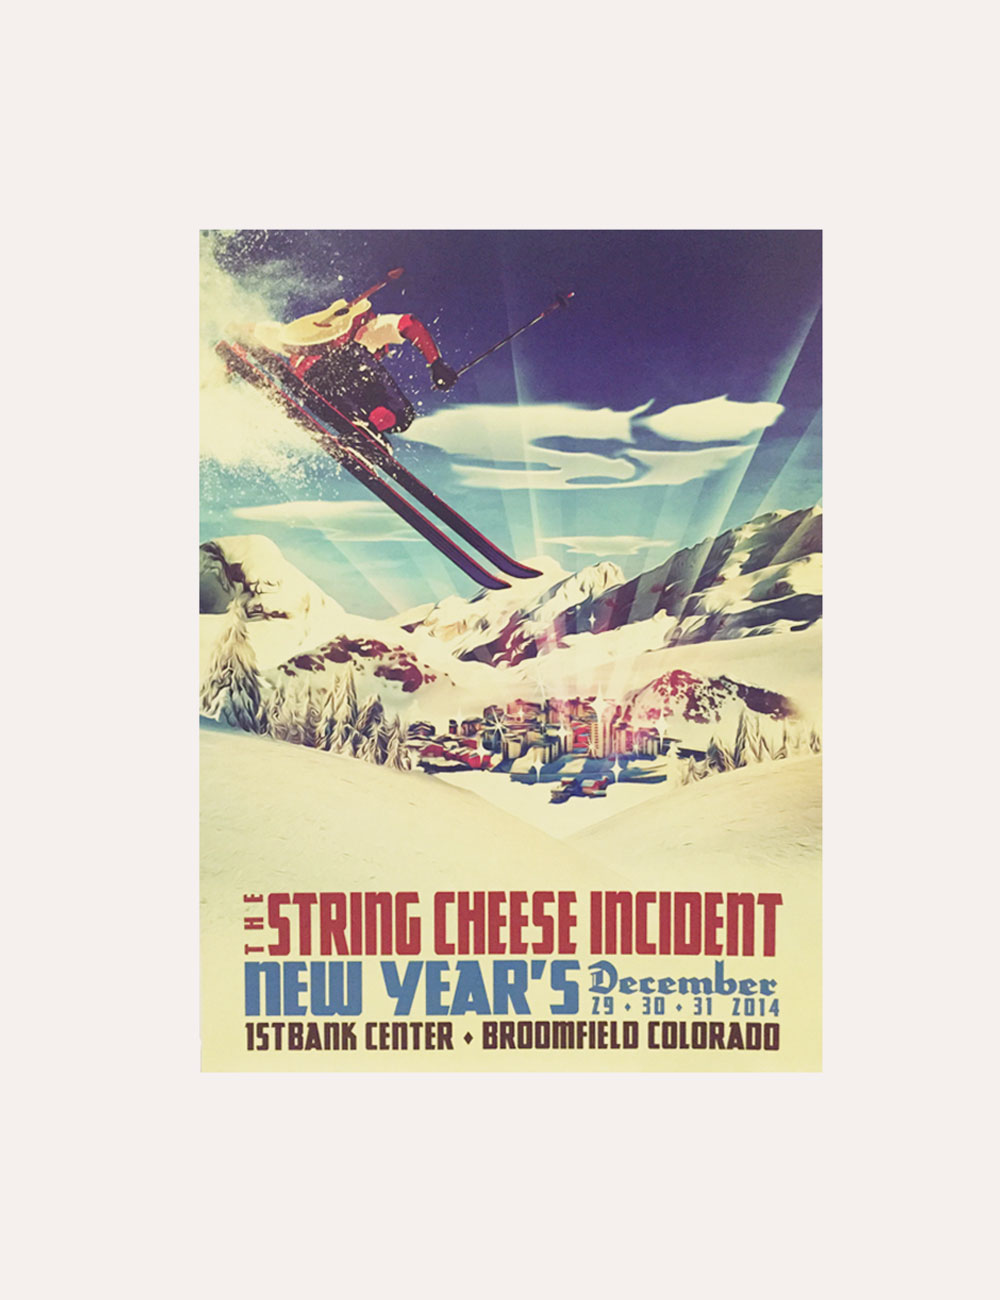 The String Cheese Incident - Merch - Poster - 2014 New Years Event Poster